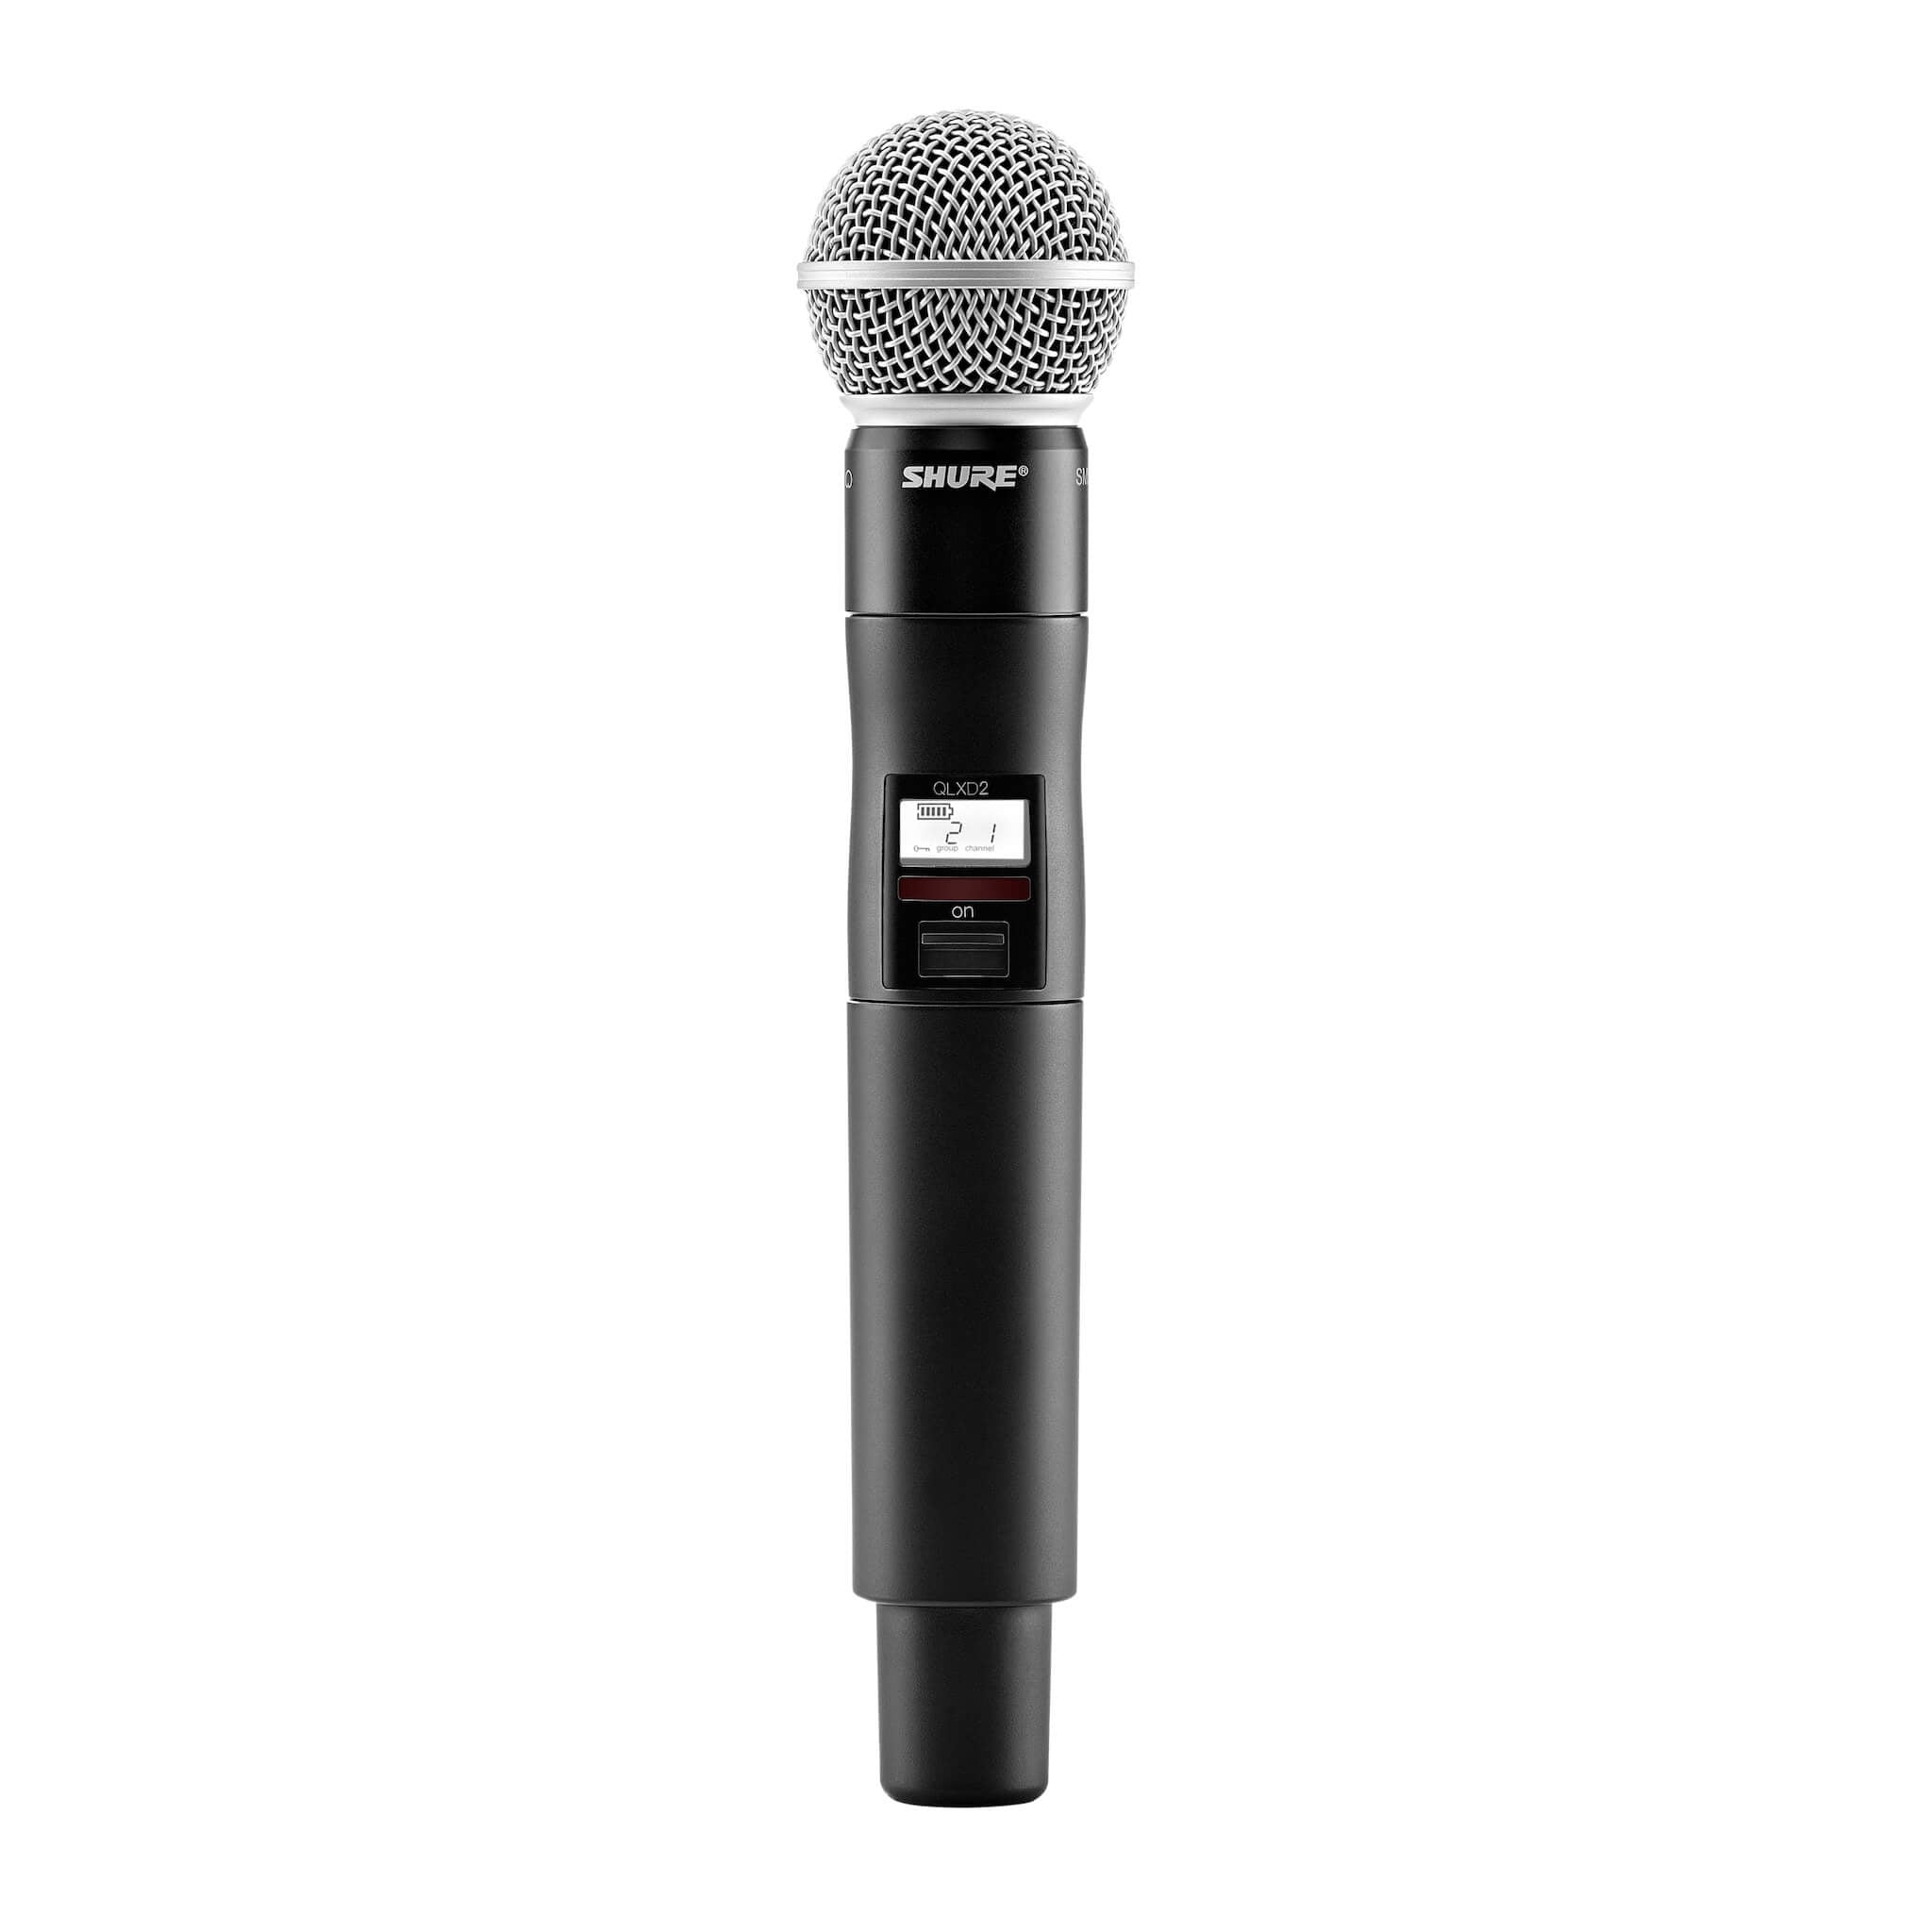 Sys　Handheld　QLXD124/85　Lavalier　and　Wireless　Microphone　Shure　Combo